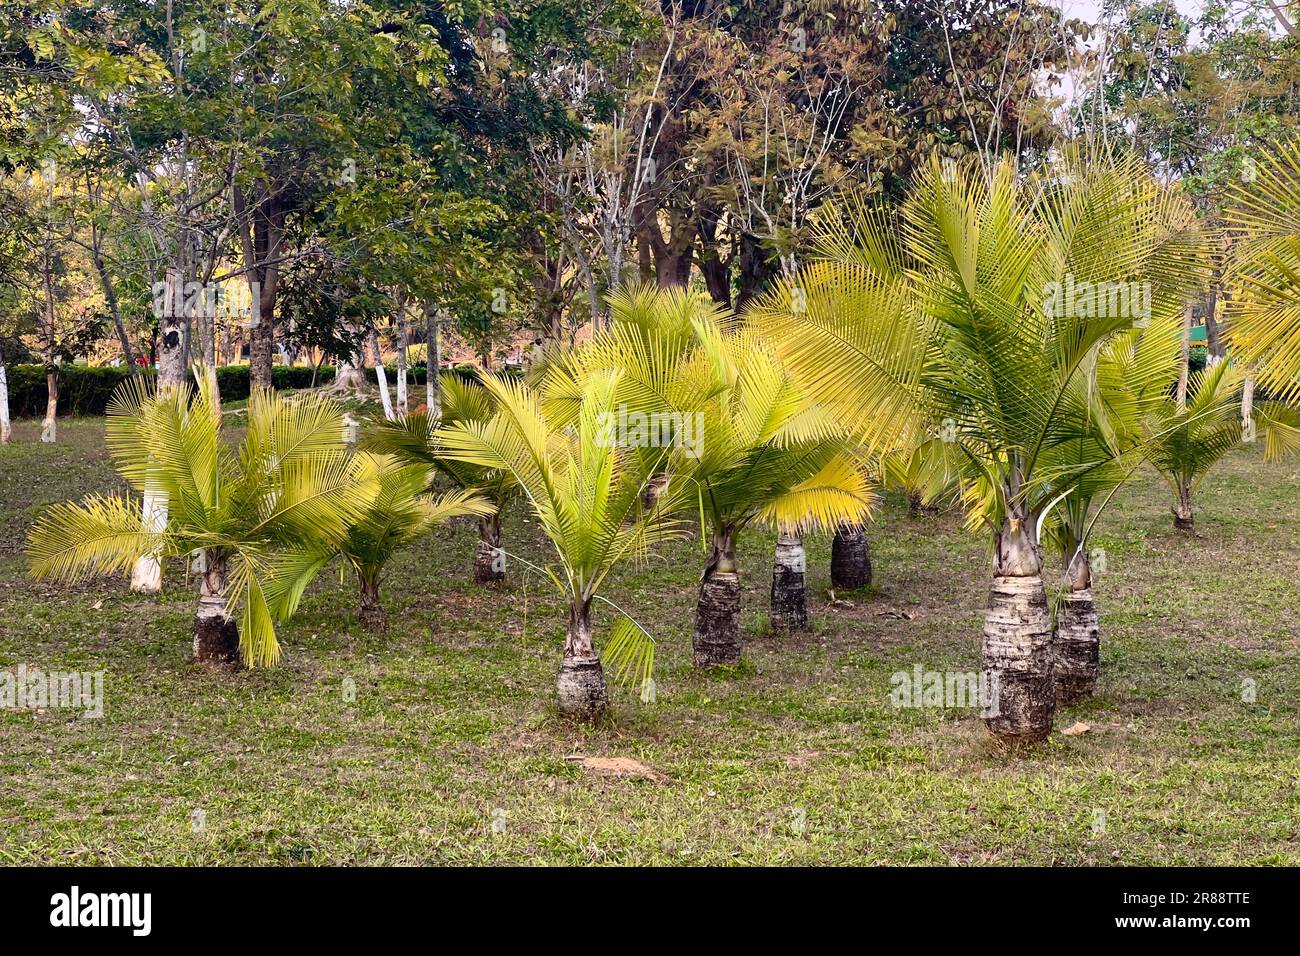 A scenic view of a park, featuring lush green majestic palm trees growing in the grassy landscape. Stock Photo